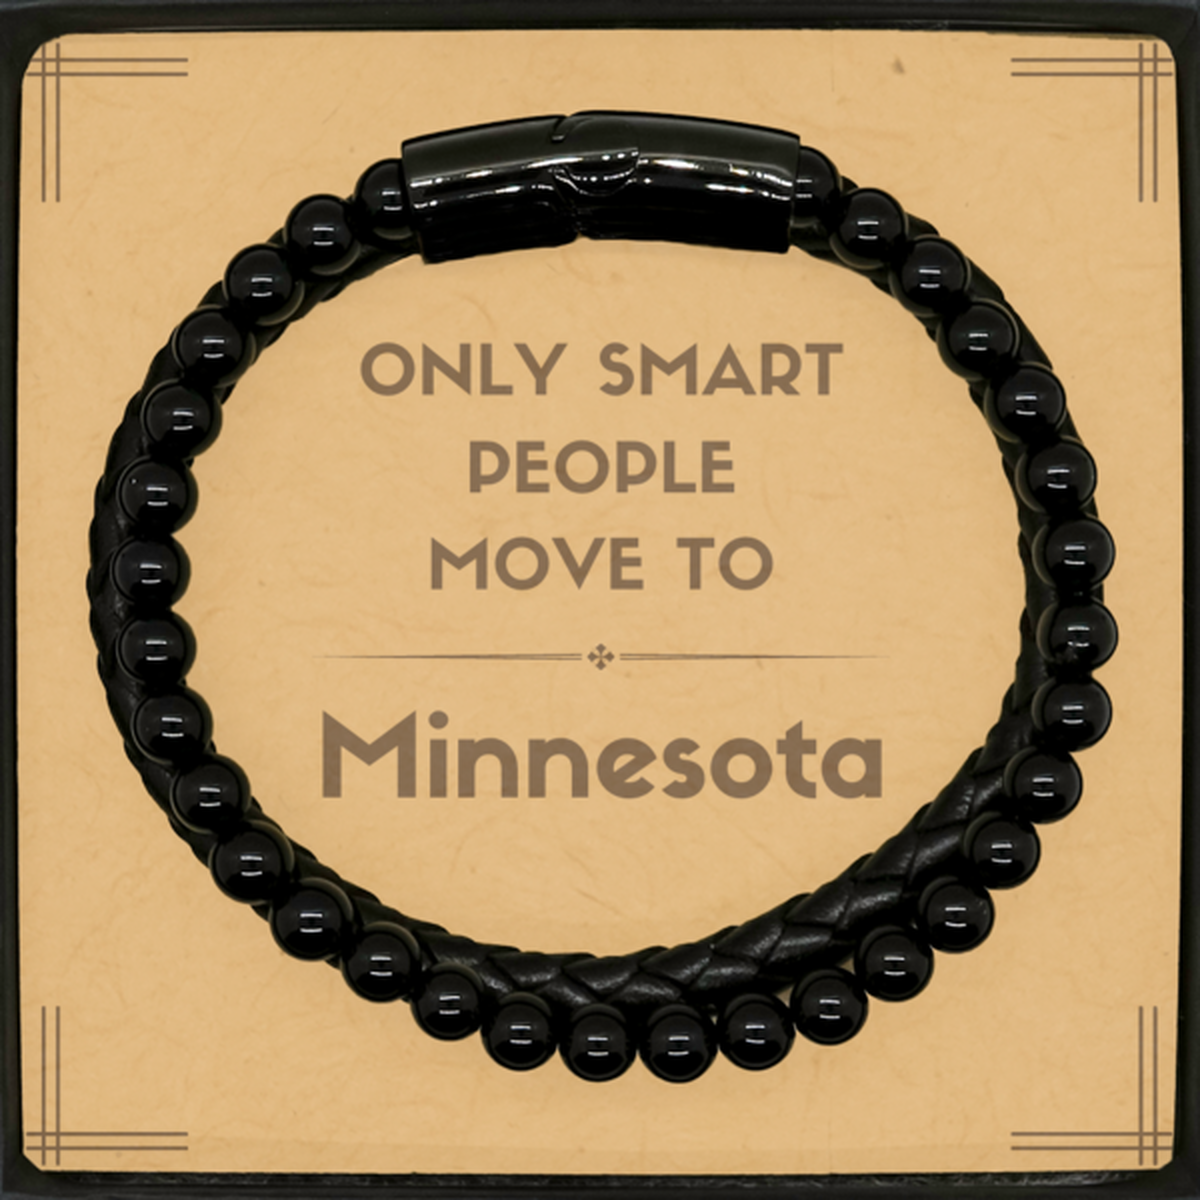 Only smart people move to Minnesota Stone Leather Bracelets, Message Card Gifts For Minnesota, Move to Minnesota Gifts for Friends Coworker Funny Saying Quote